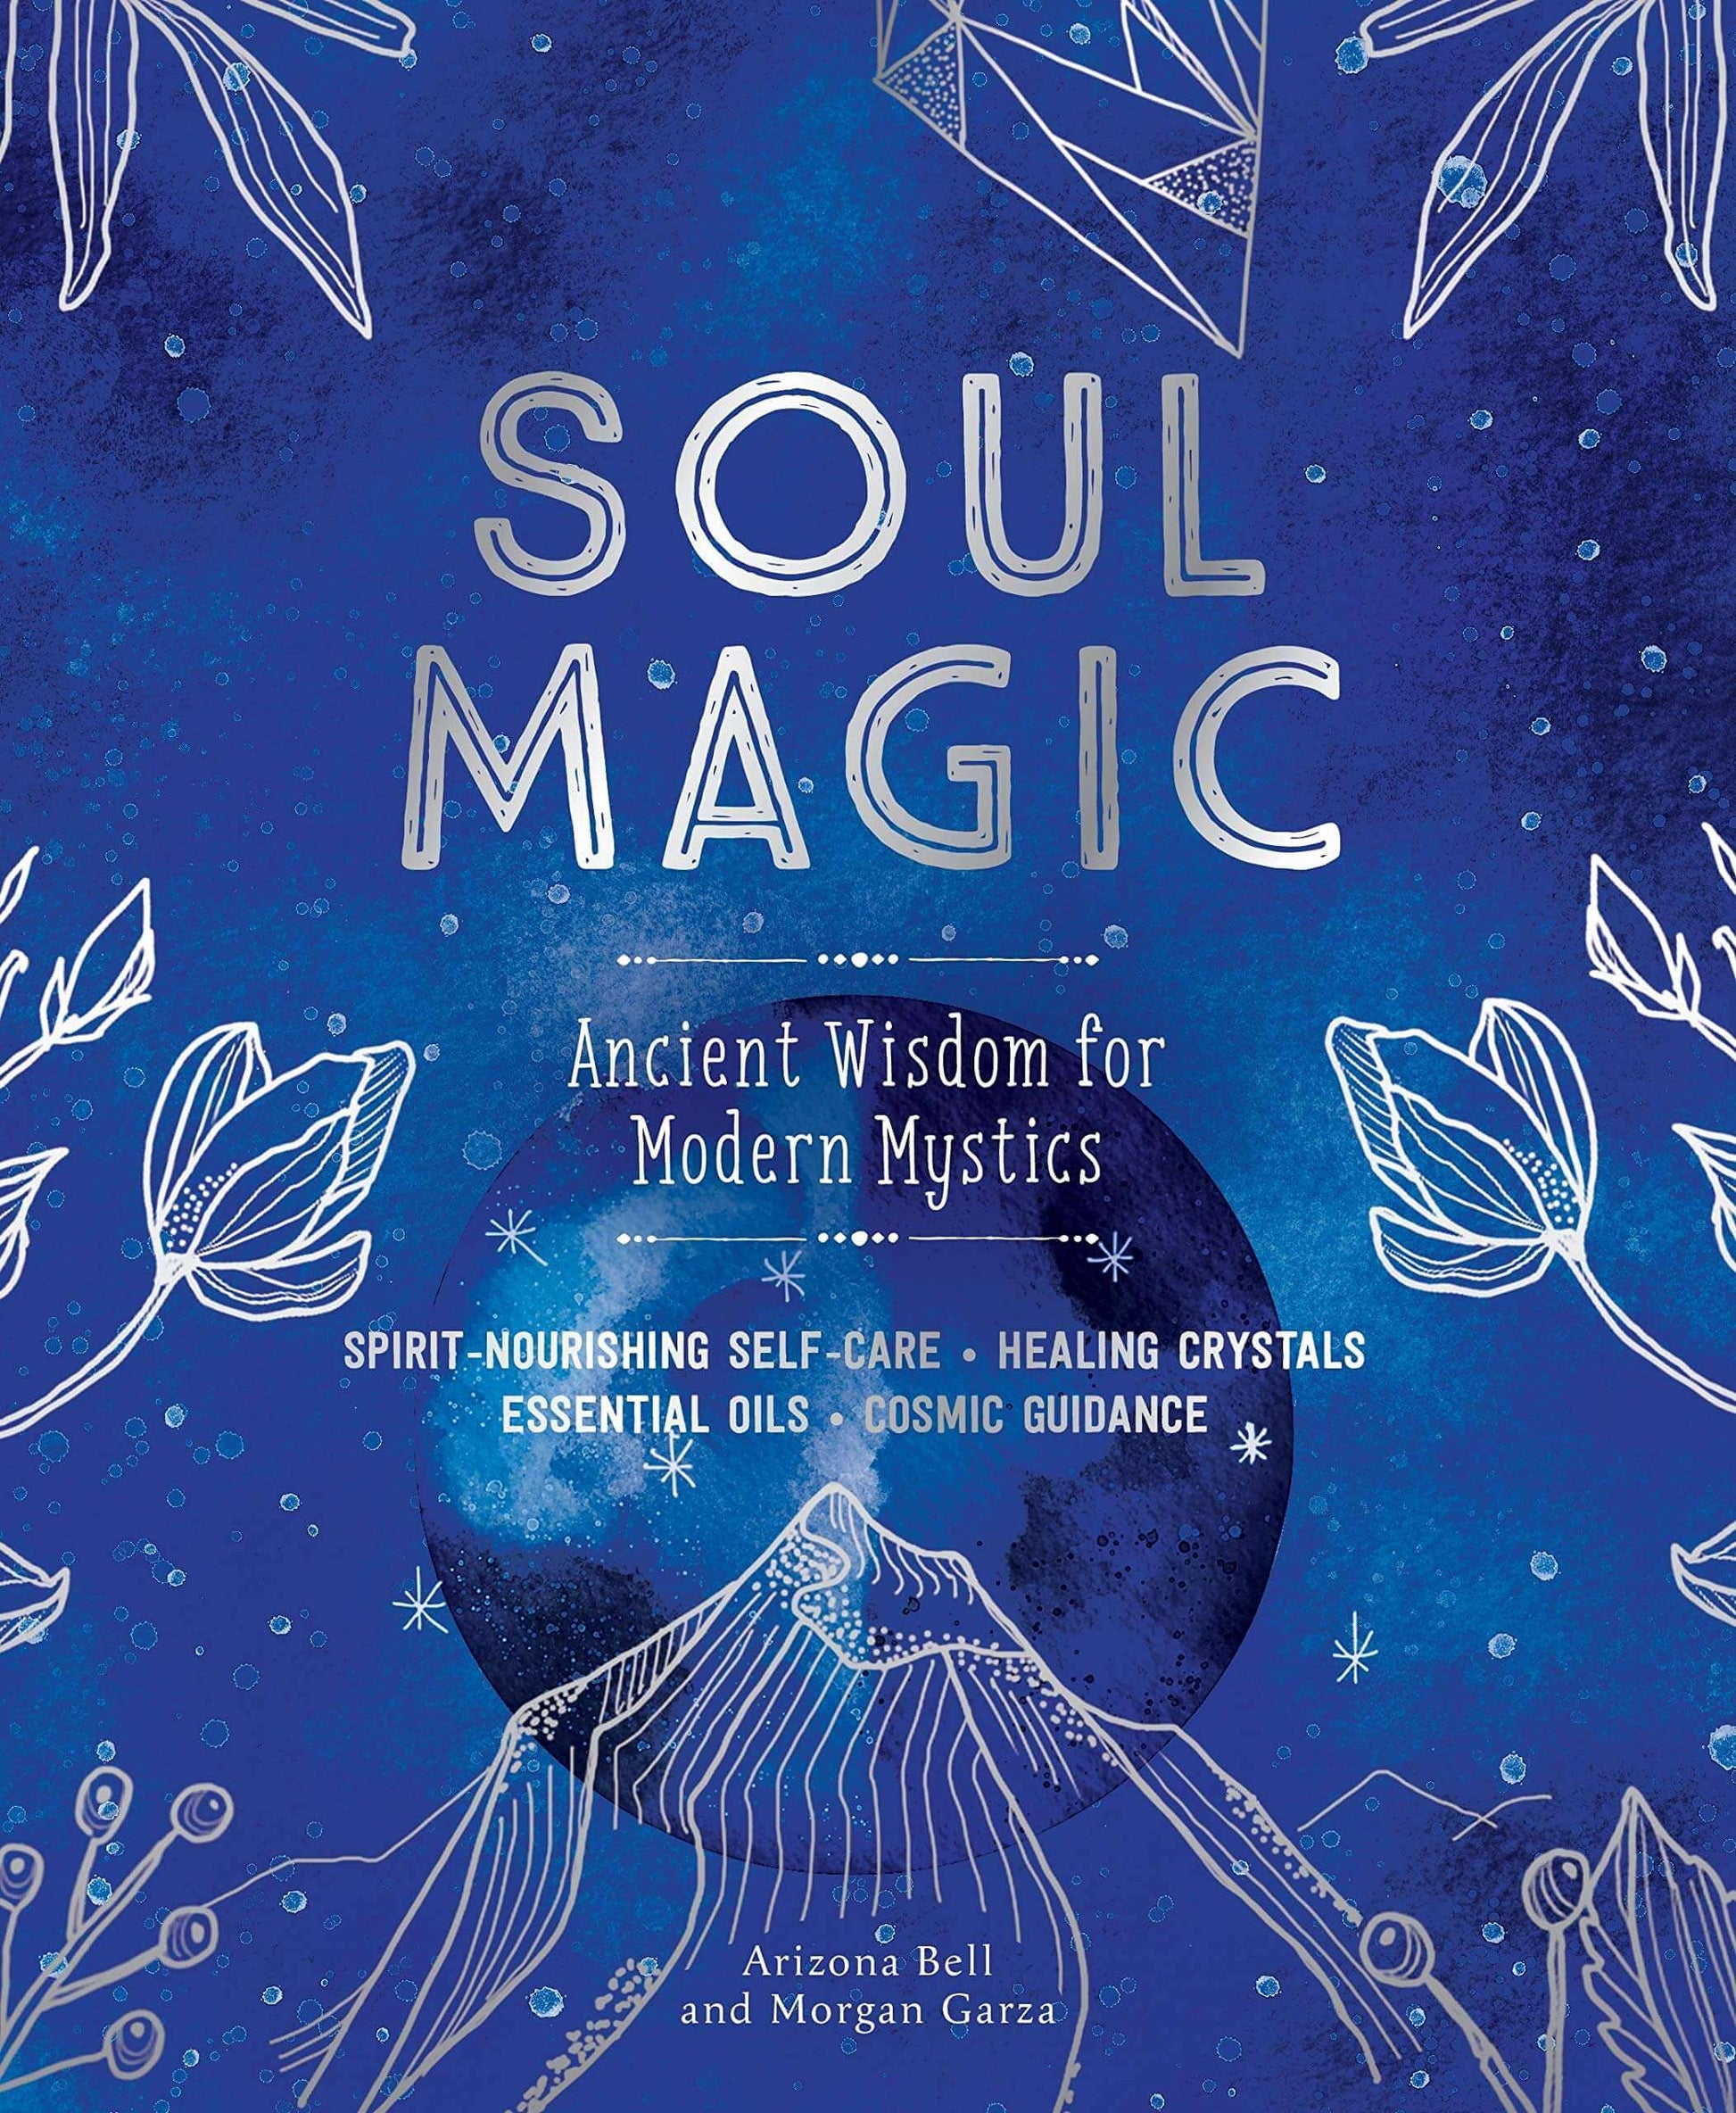 SOUL MAGIC: ANCIENT WISDOM FOR MODERN MYSTICS at $24 only from Spiral Rain